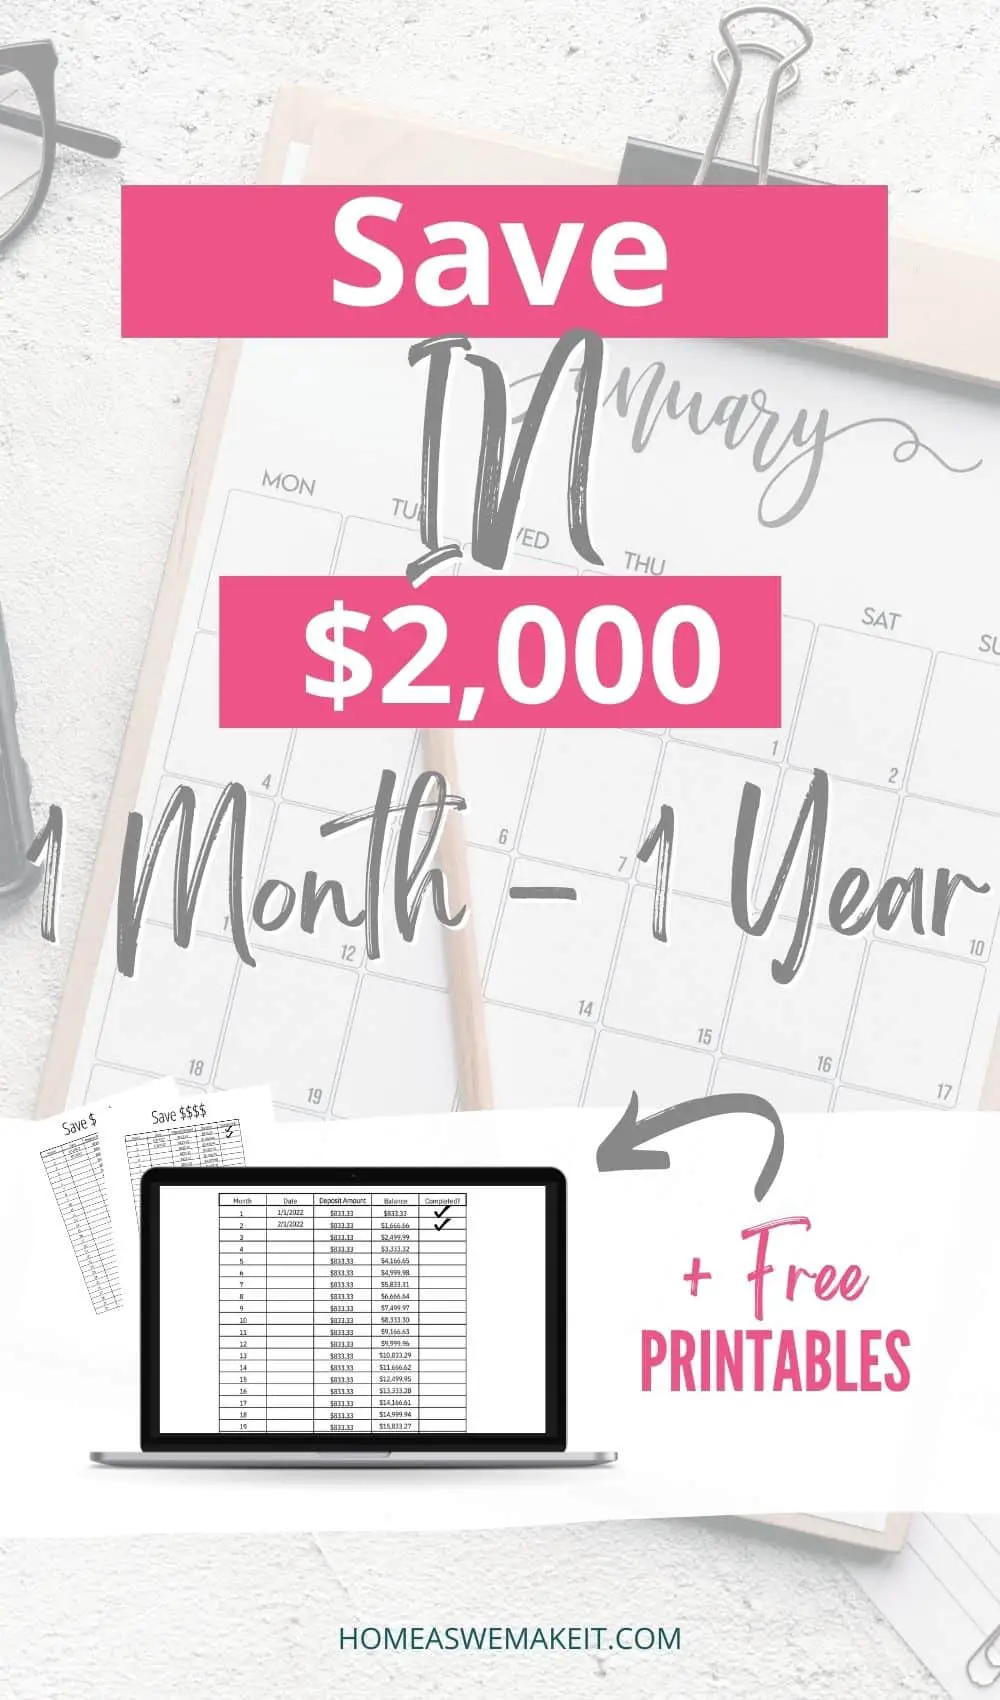 Save $2,000 in 1 month to 1 year with these printable pdf charts